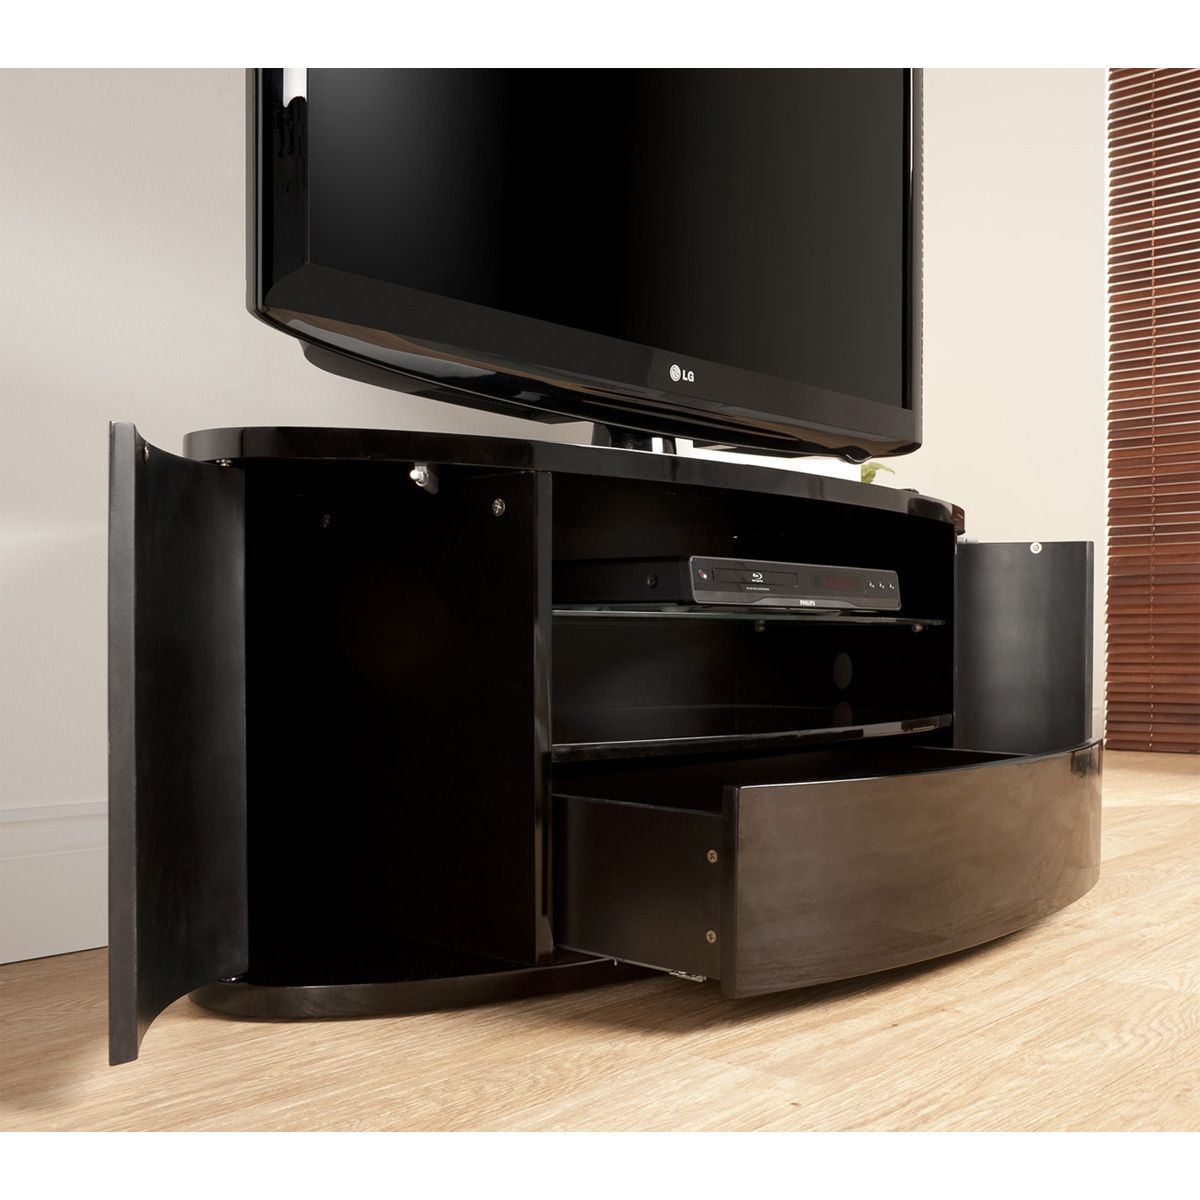 Curved Design Black Lcd Plasma Tv Stand 40 50 Inch Screen Throughout Tv Stands 40 Inches Wide (View 8 of 15)